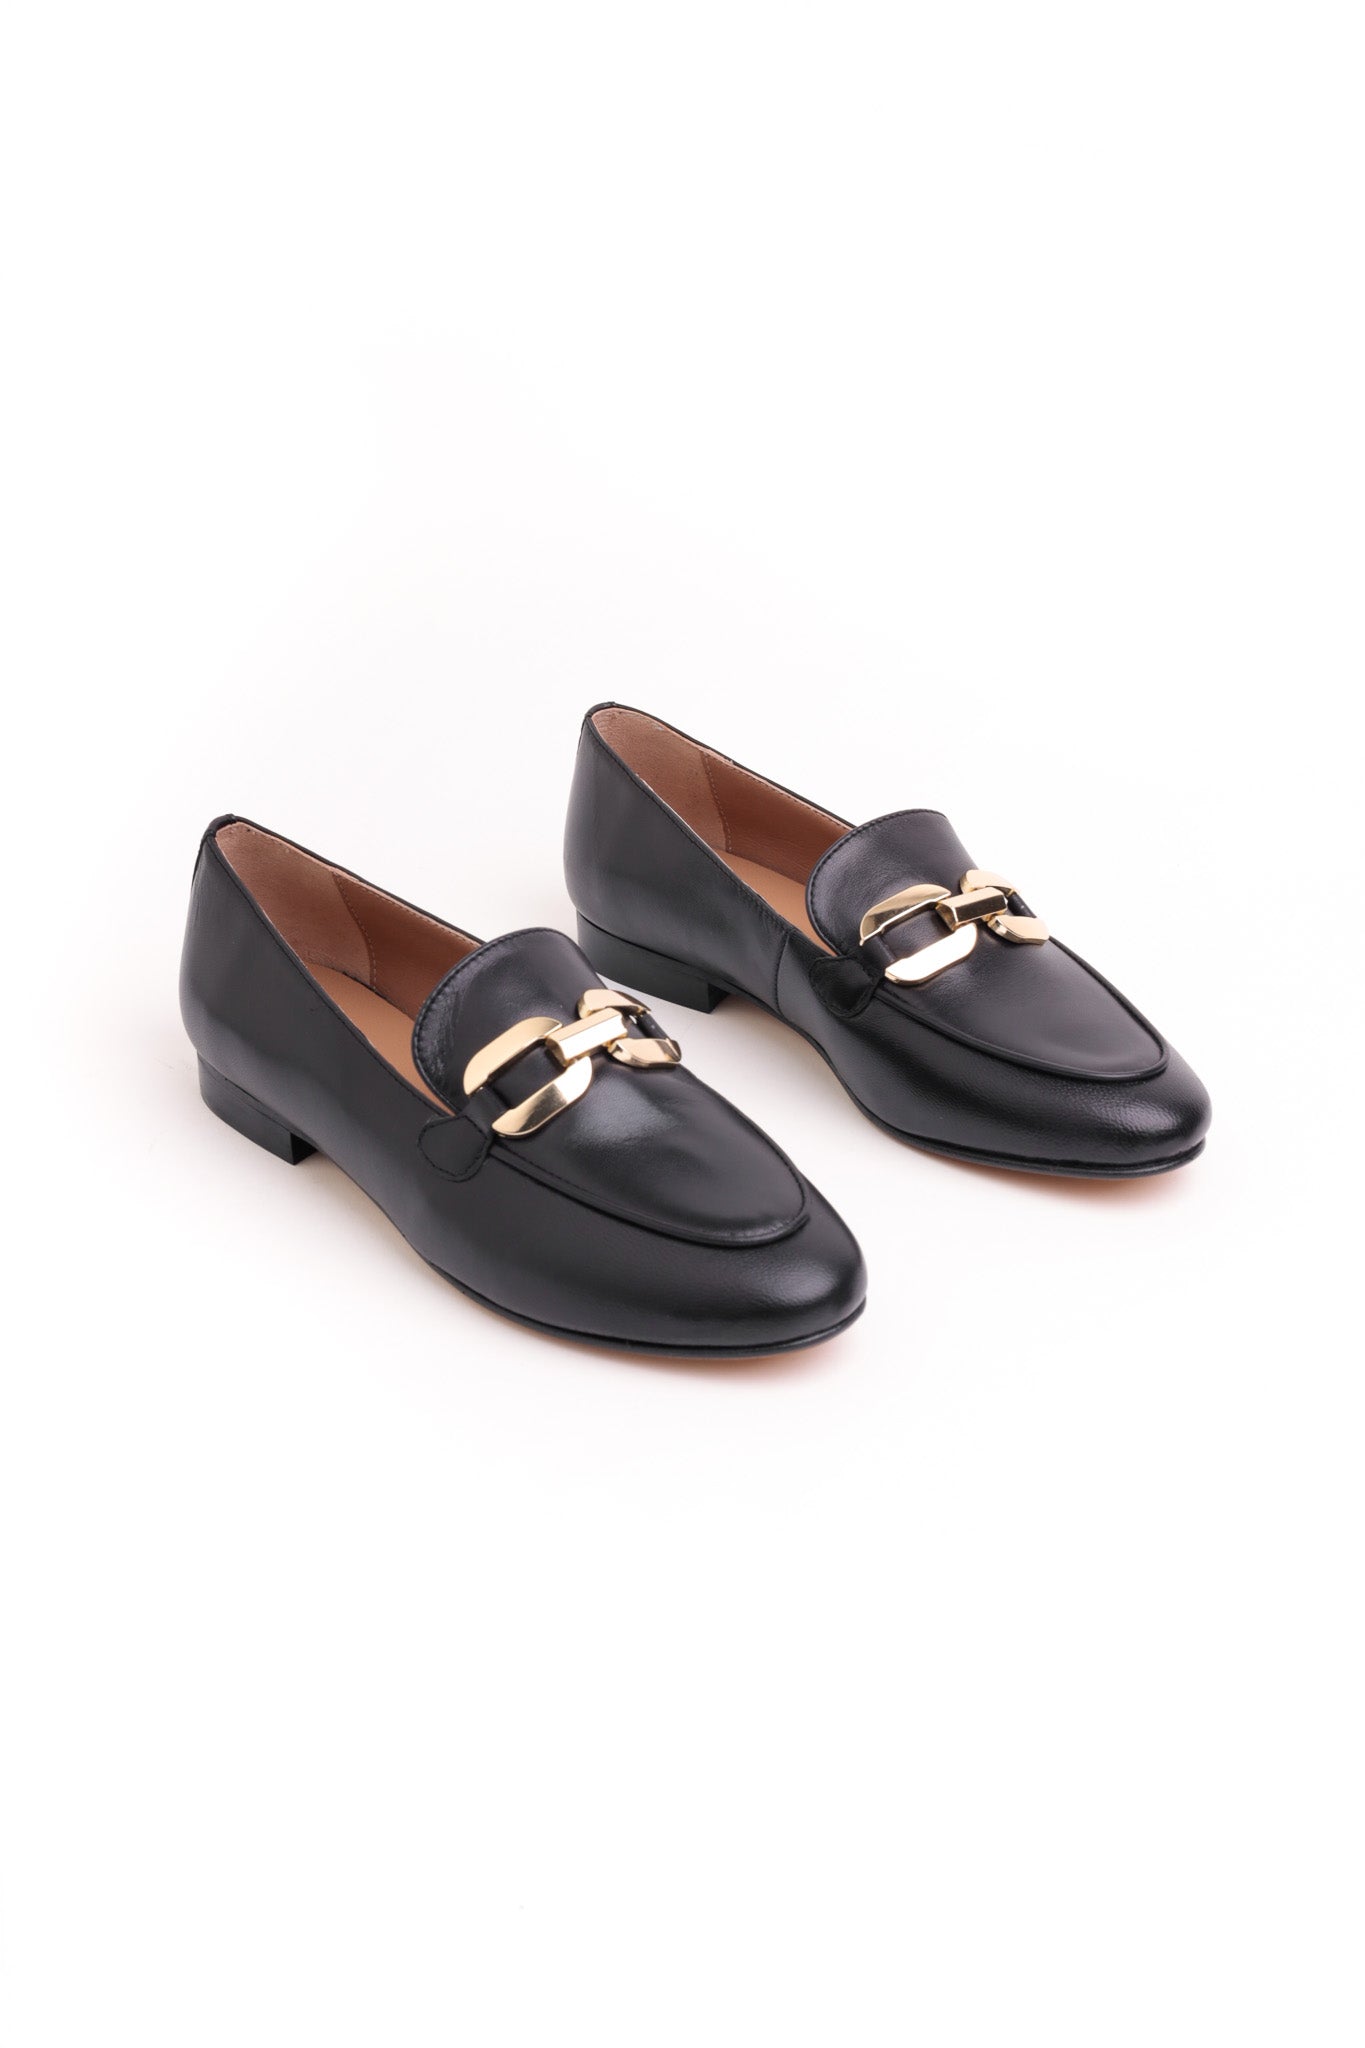 Ruth leather loafers